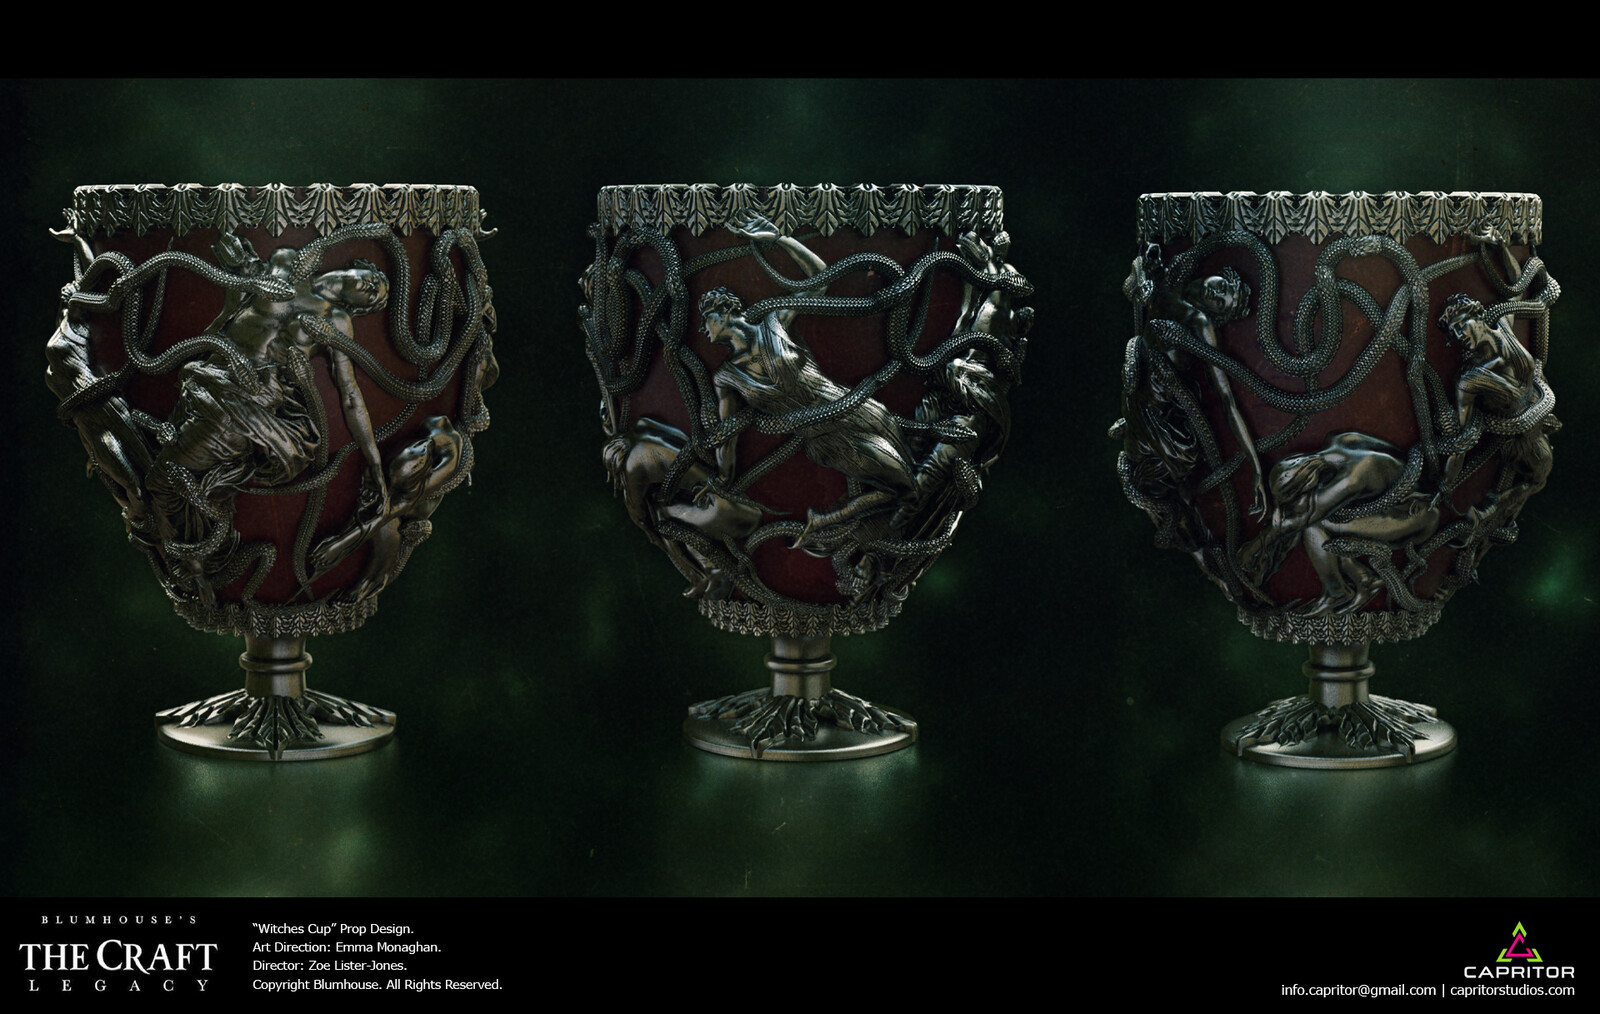 Render of the "Witches Cup" Prop Design.